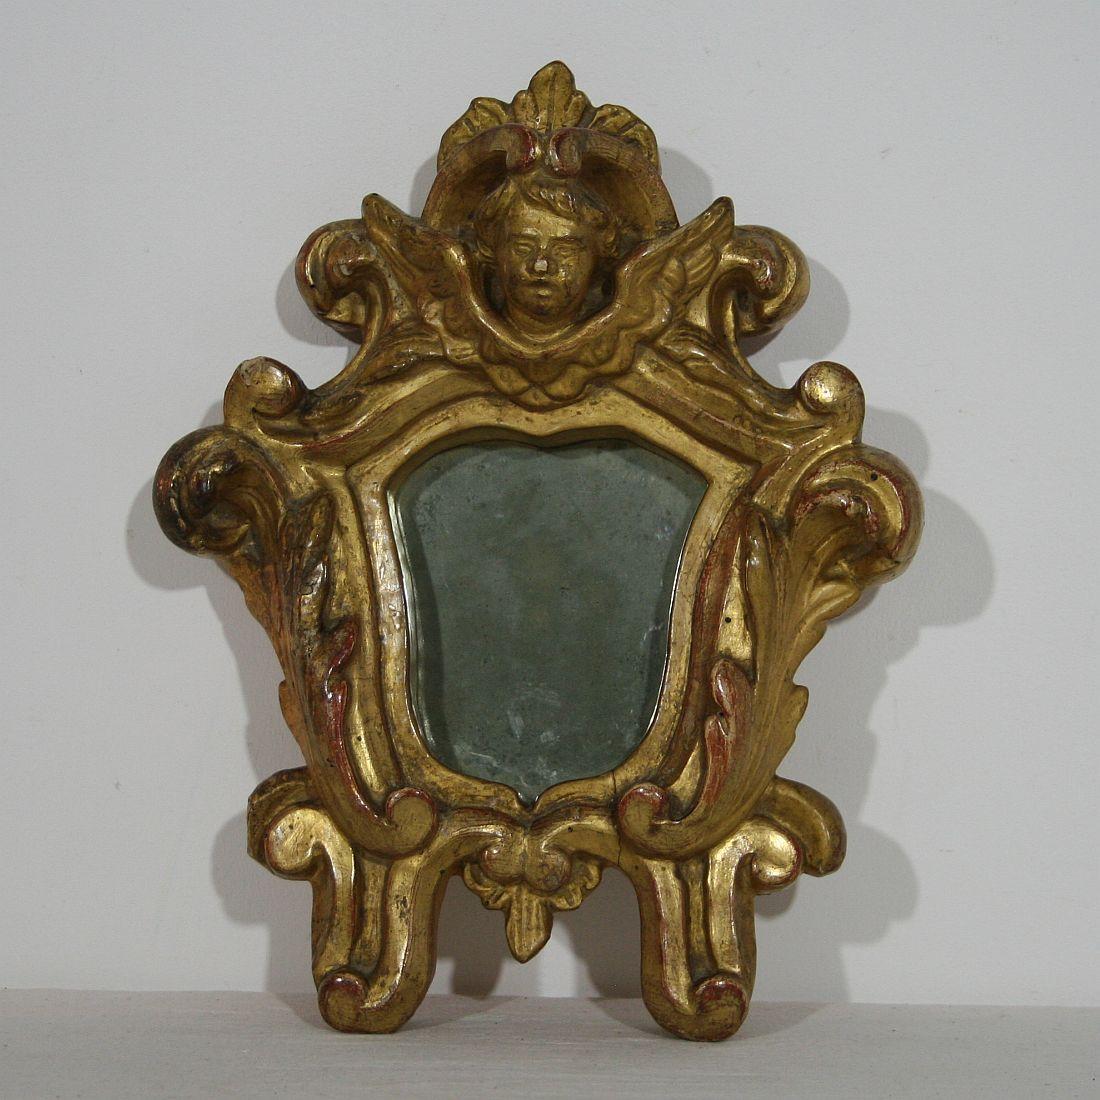 Unique pair of giltwood baroque mirrors with carved angel heads,
Italy, circa 1750
Weathered.